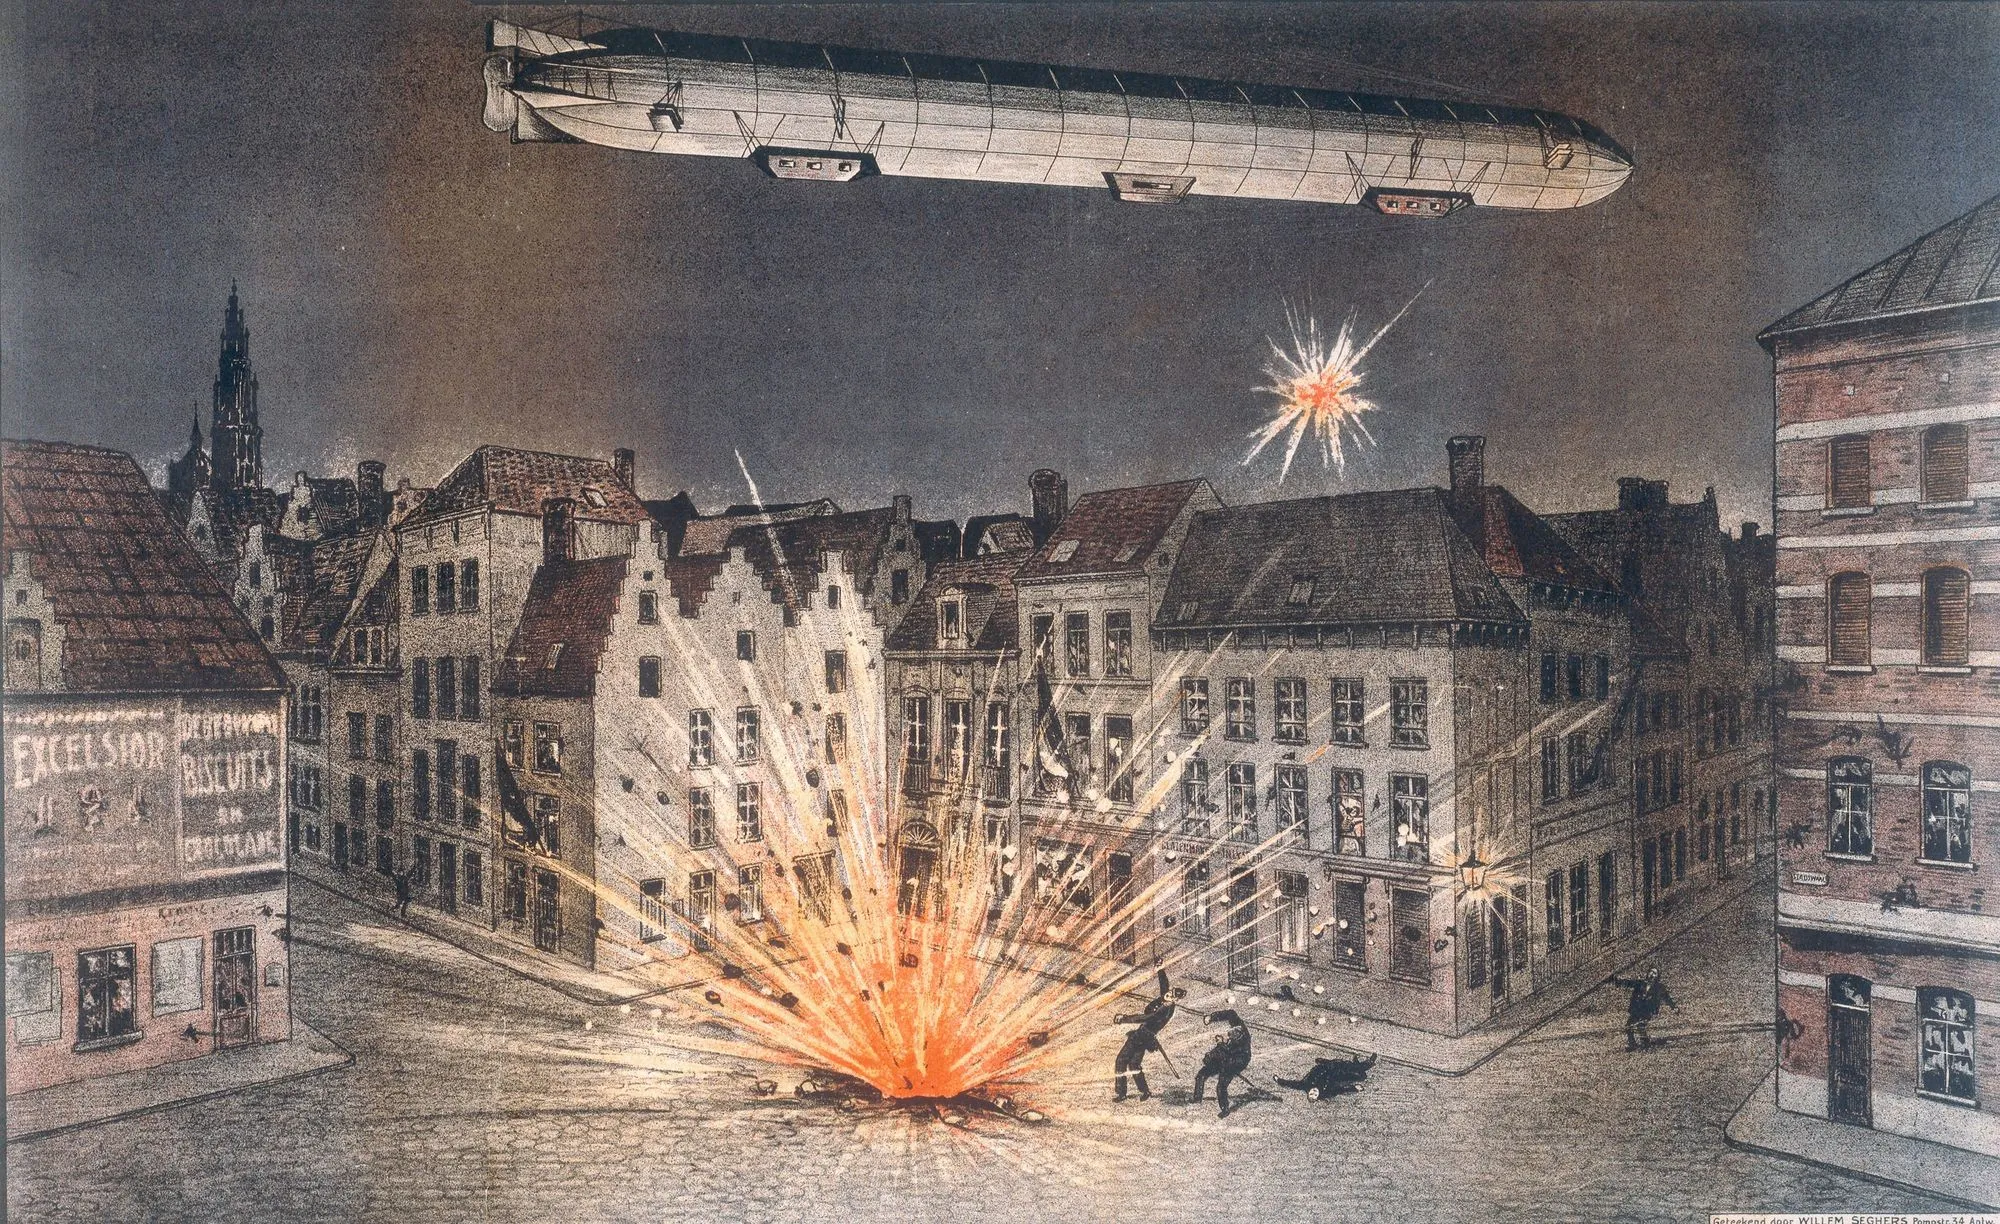 Willem Seghers,
Bombardement d'Anvers,
1914, lithographie,
42 x 62 cm, Imperial War
Museum, Londres.